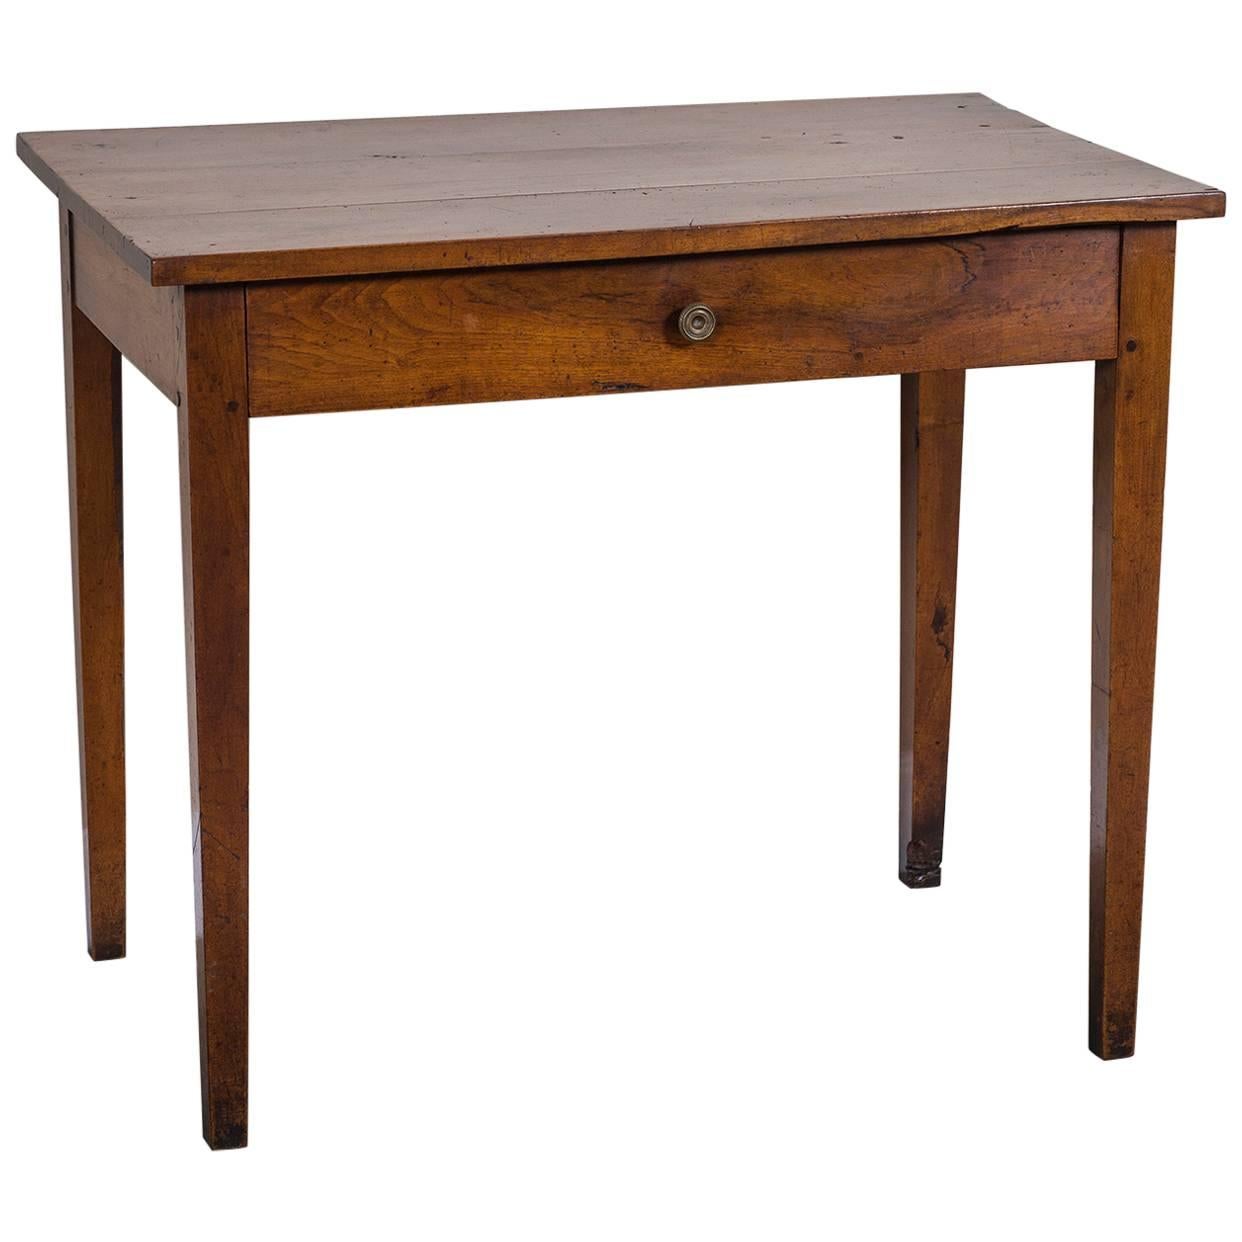 Antique French Louis Philippe Walnut Table with Drawer, circa 1850